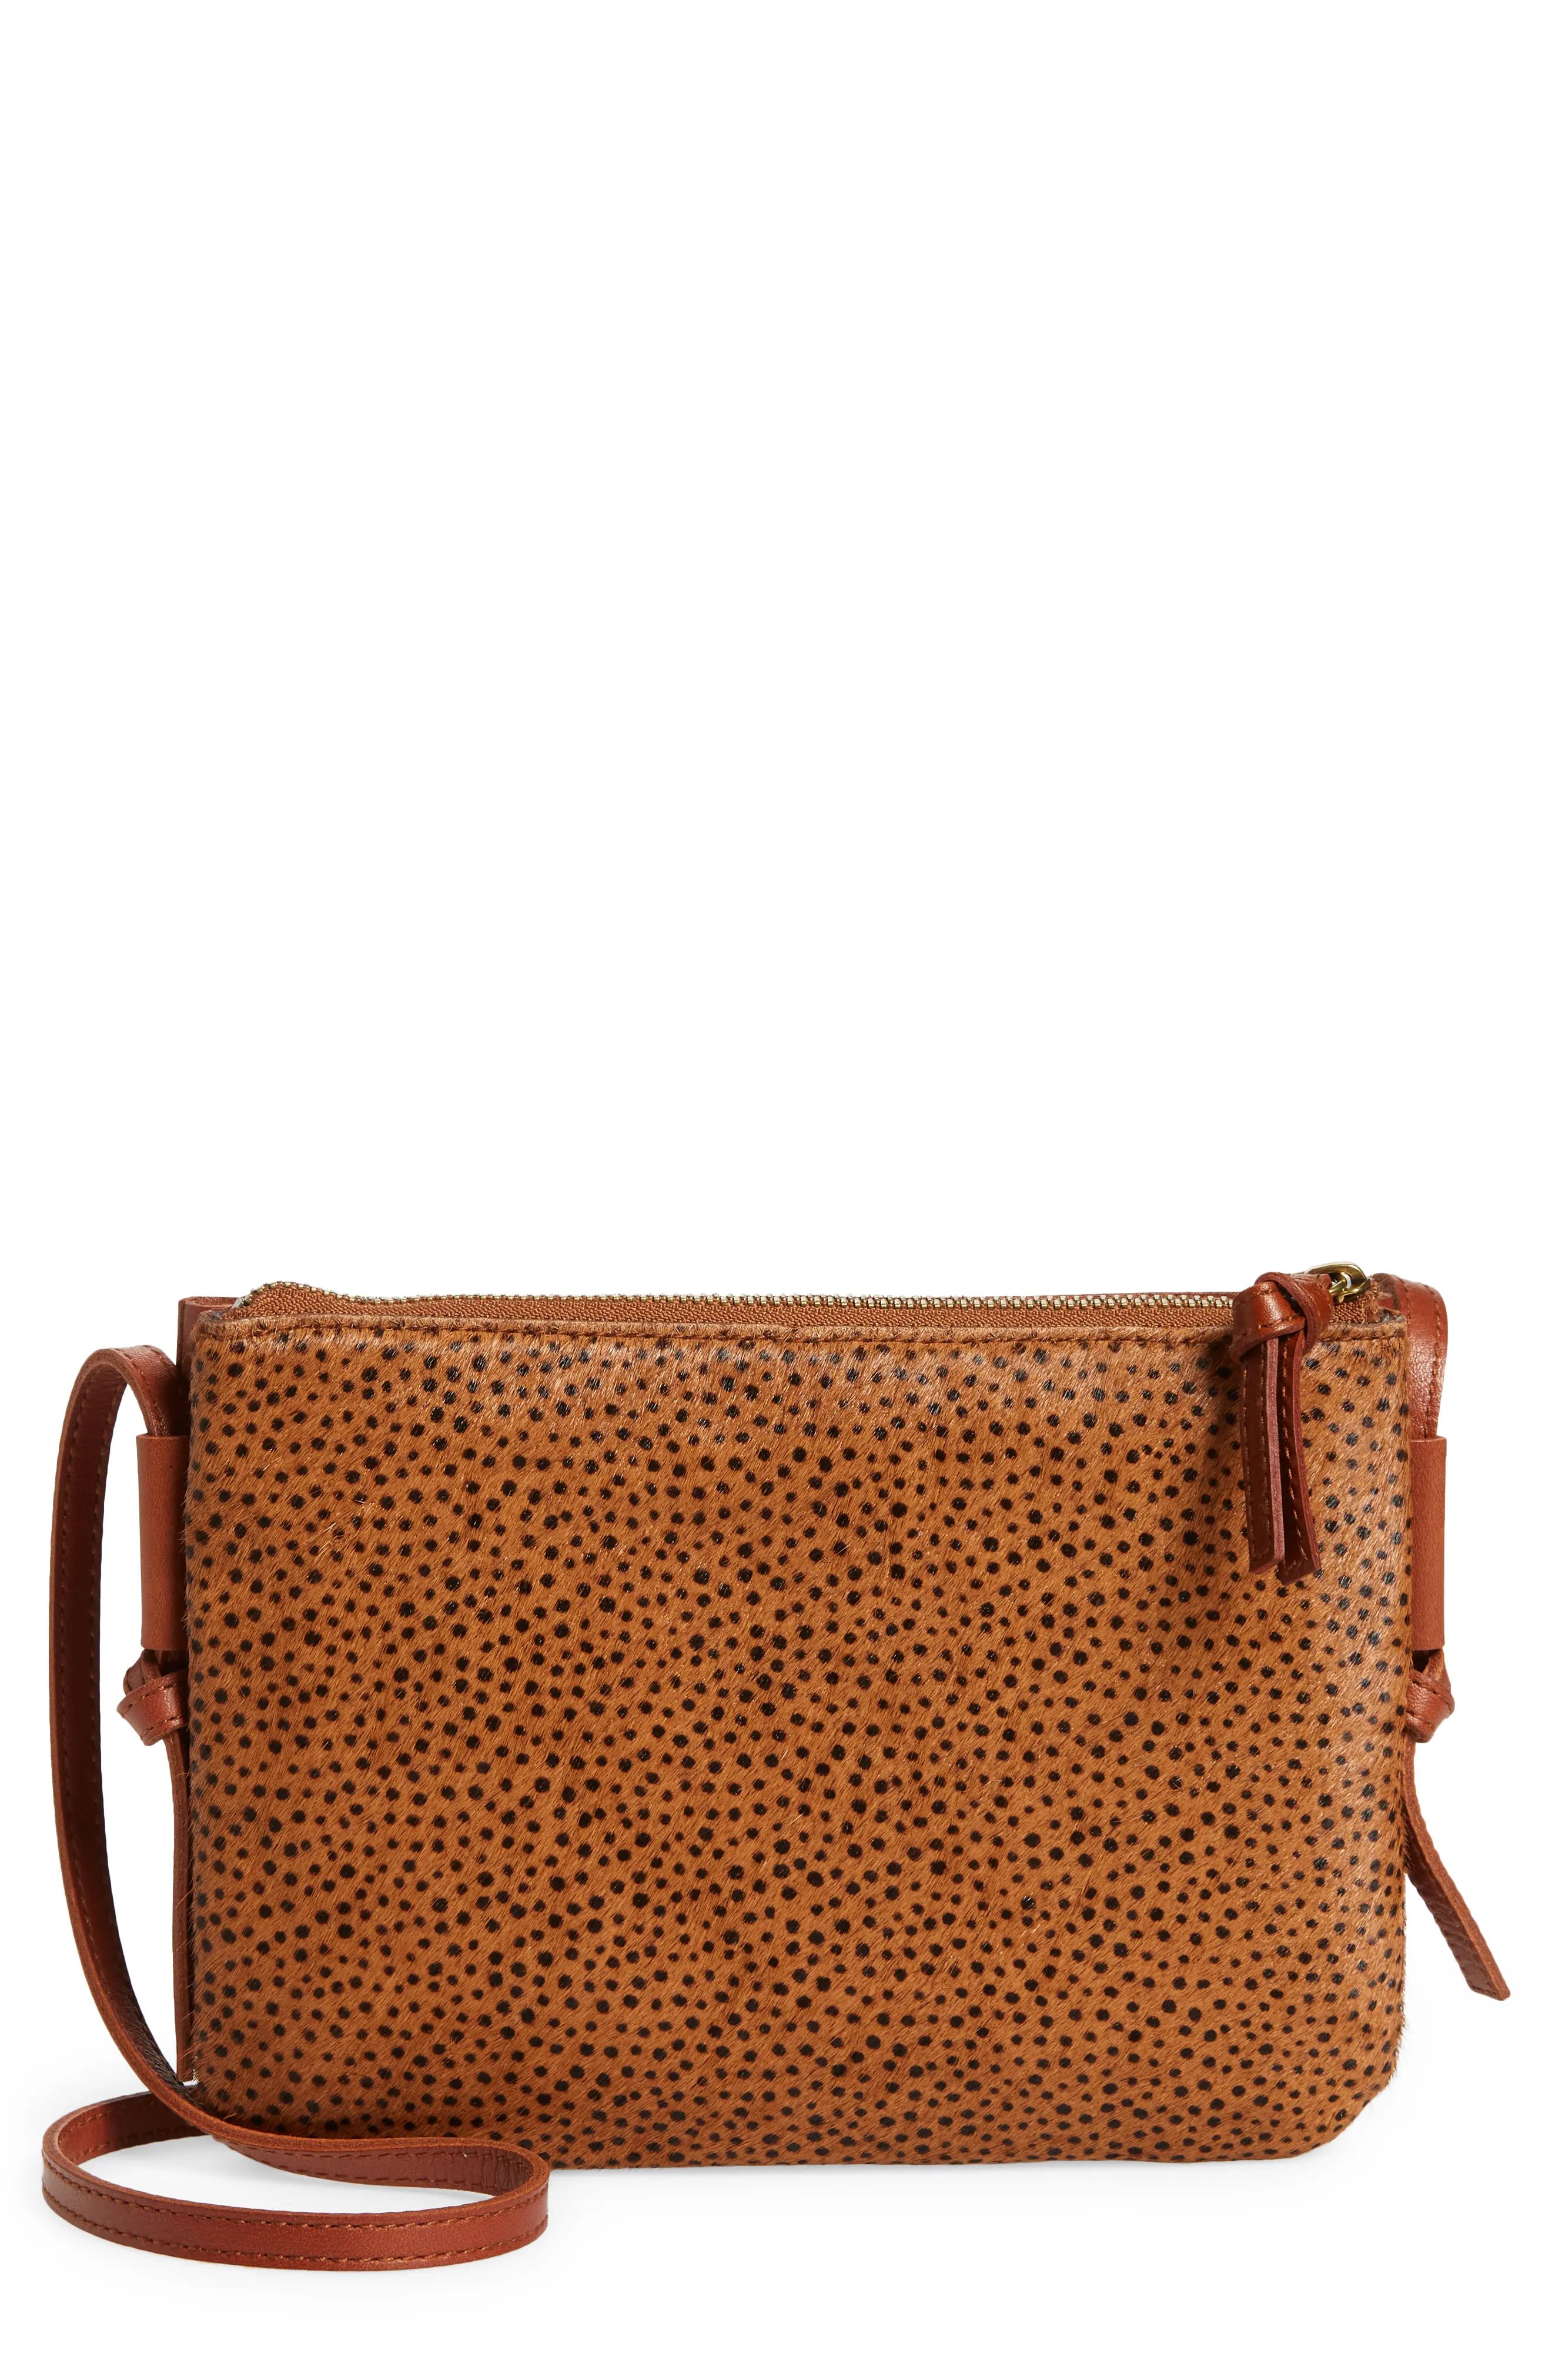 Madewell The Knotted Spotted Calf Hair Crossbody Bag in Warm Hickory Dot Multi at Nordstrom | Nordstrom